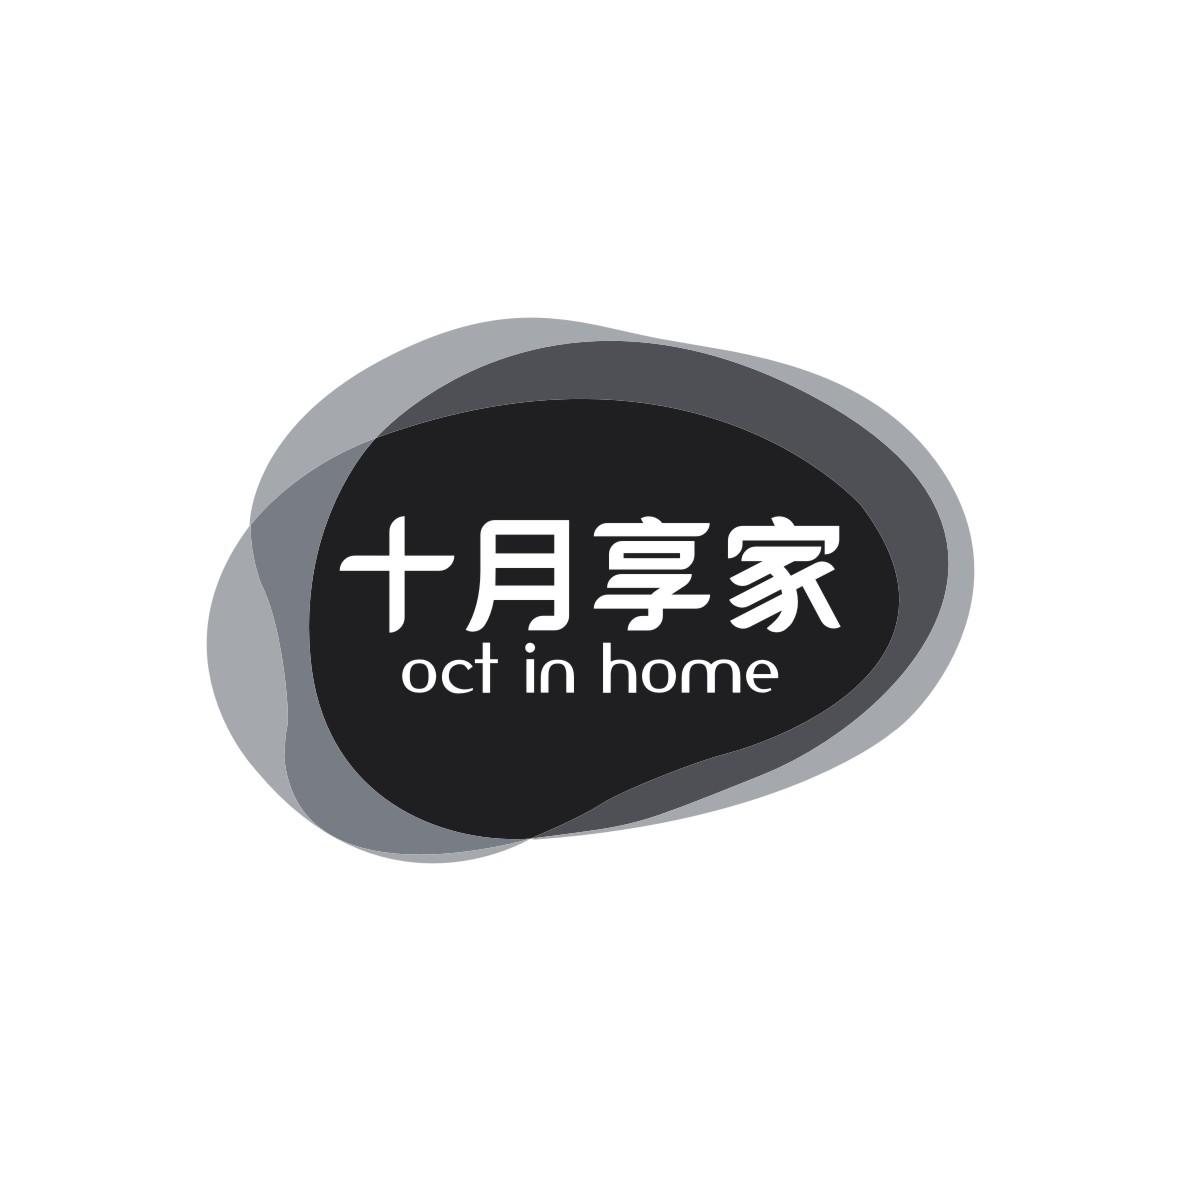 ʮ OCT IN HOME